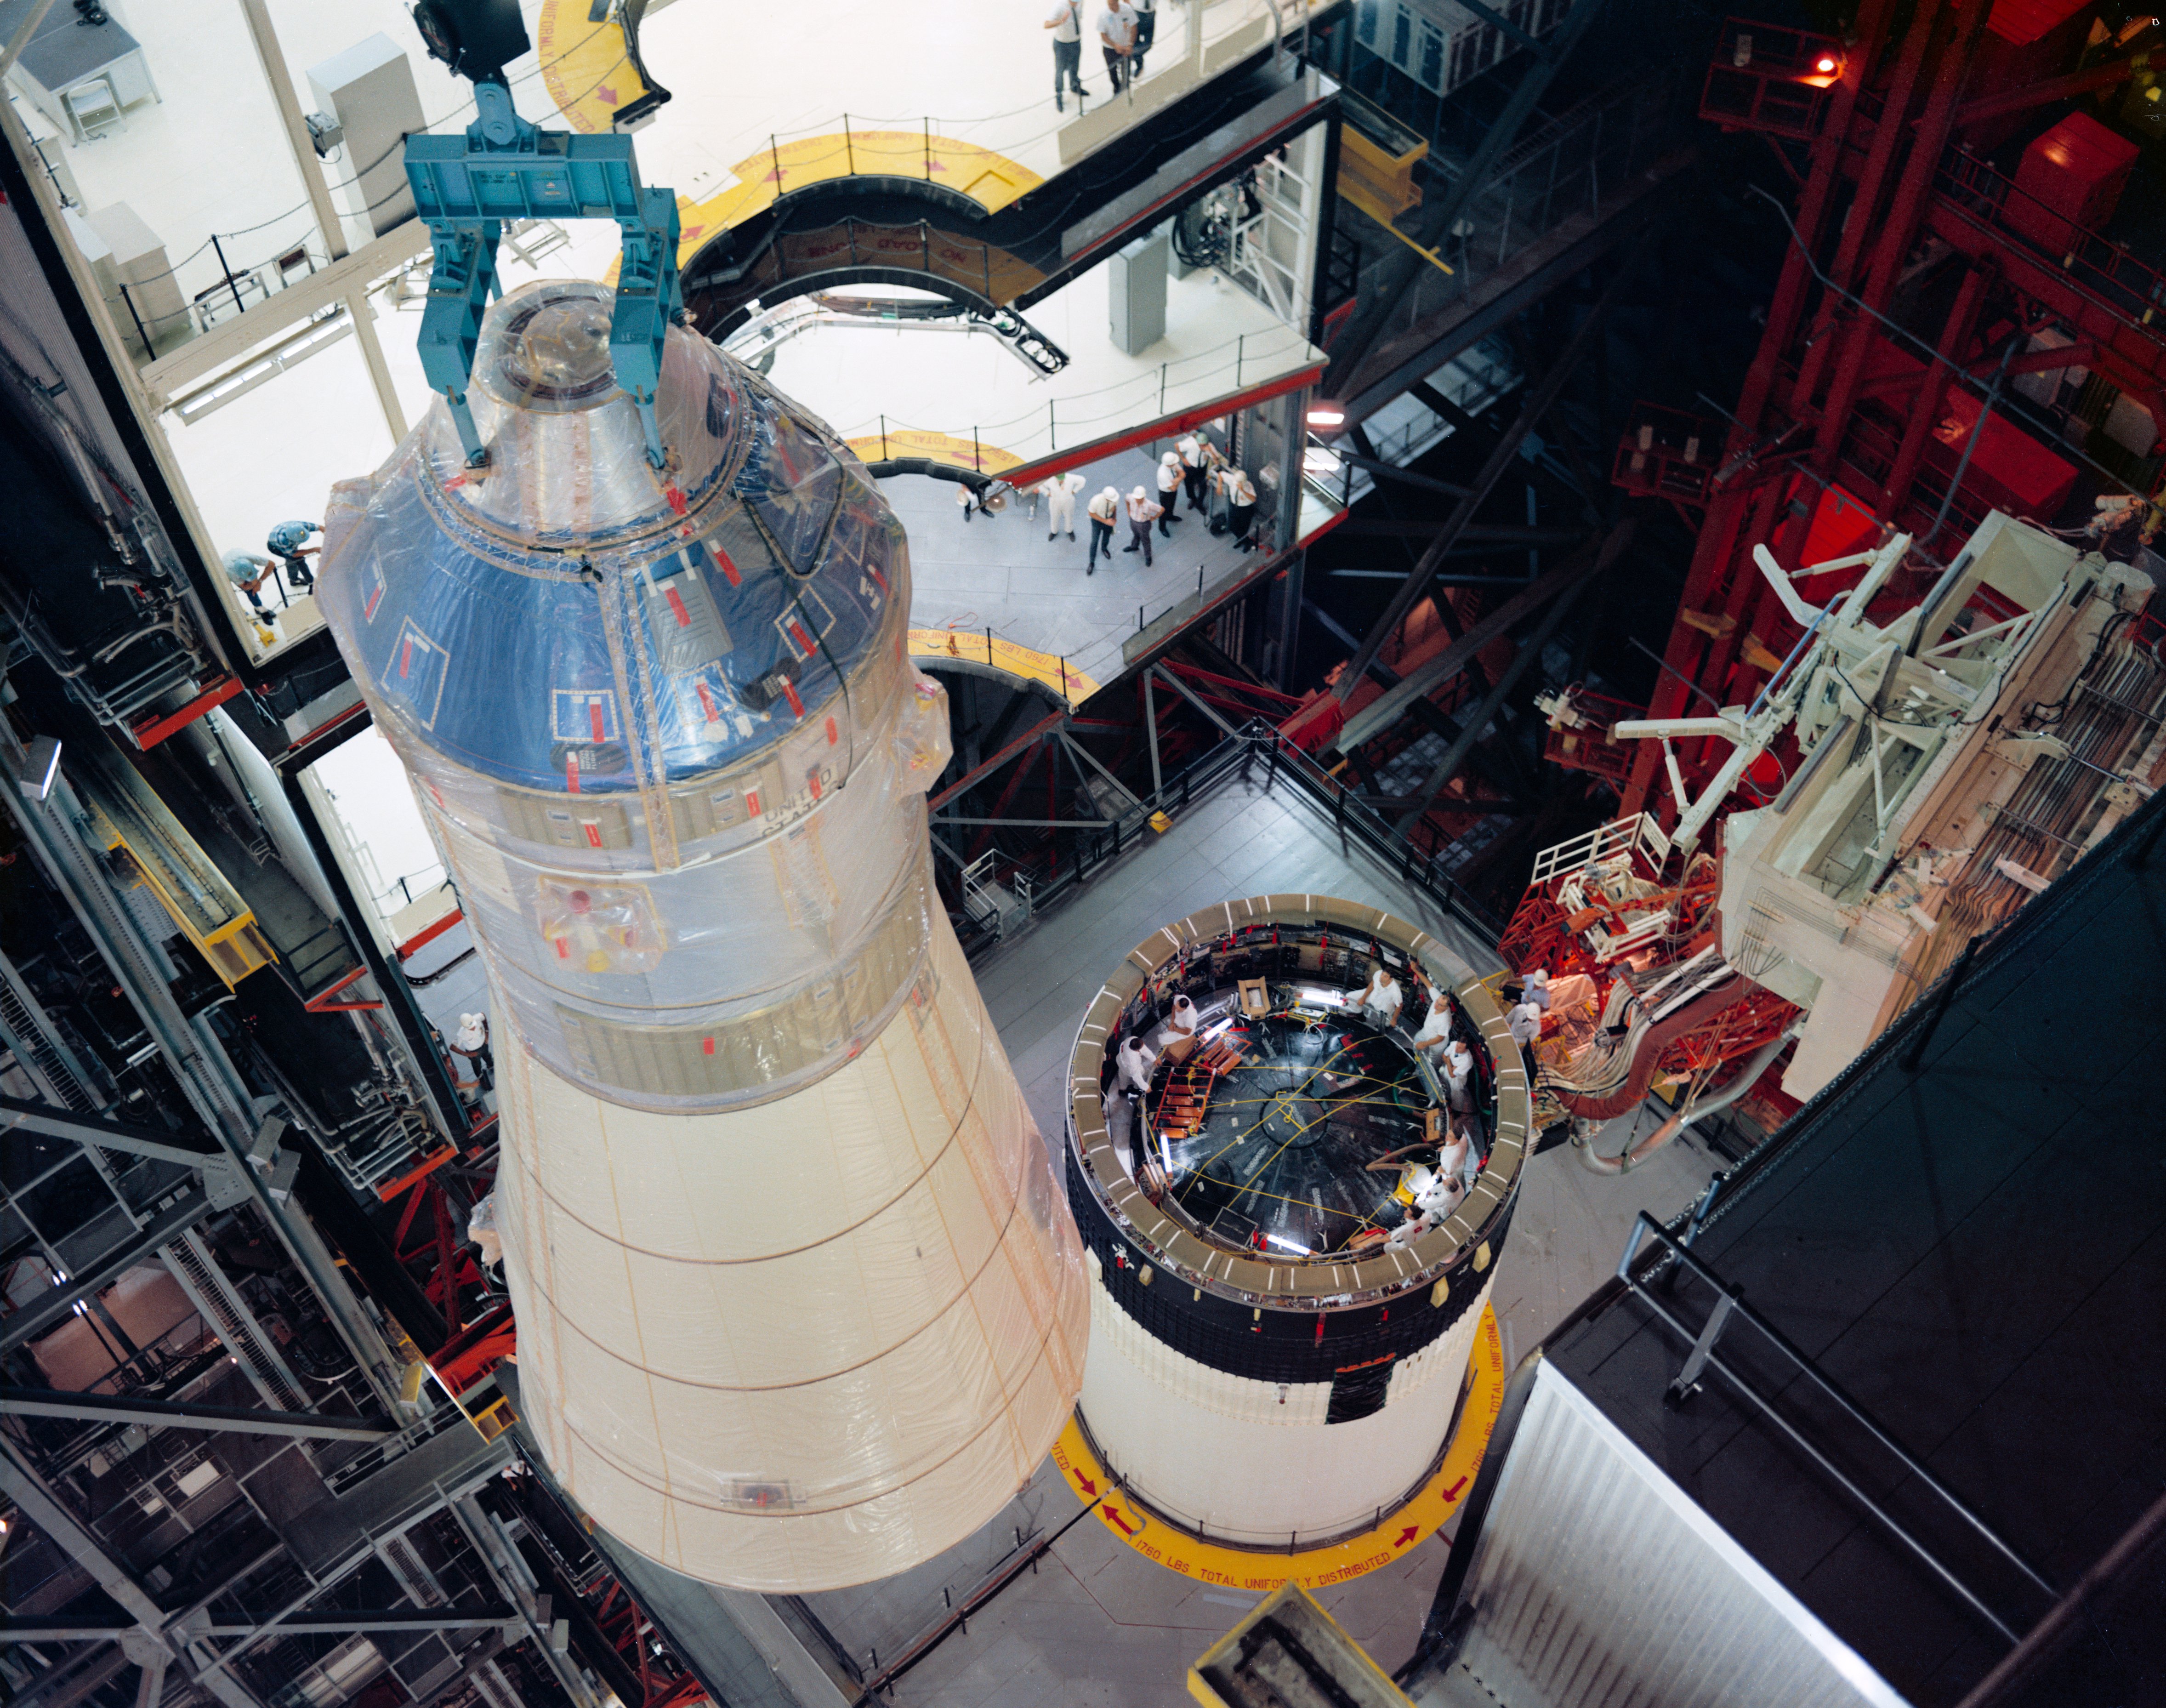 Erection and mating of spacecraft 103 to Launch Vehicle AS-503 in the VAB for the Apollo 8 mission. Photo taken in October 1968. NASA Image ID: S68-49478